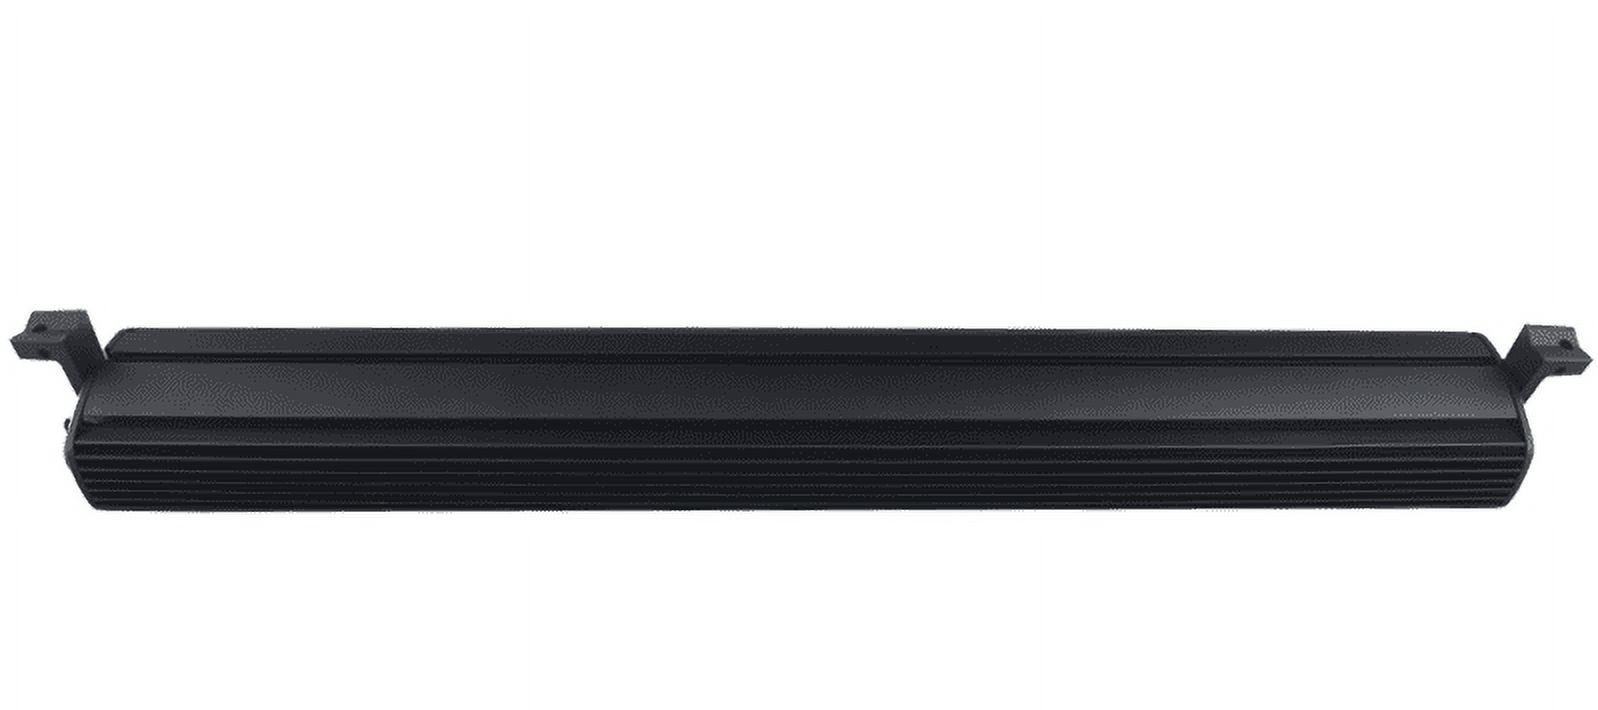 Wet Sounds STEALTH-10 ULTRA HD-B Sound Bar with 1.75 Clamps and Sliders and SSV WP-RZ4GBS10-W 10" Powered Subwoofer - image 4 of 7